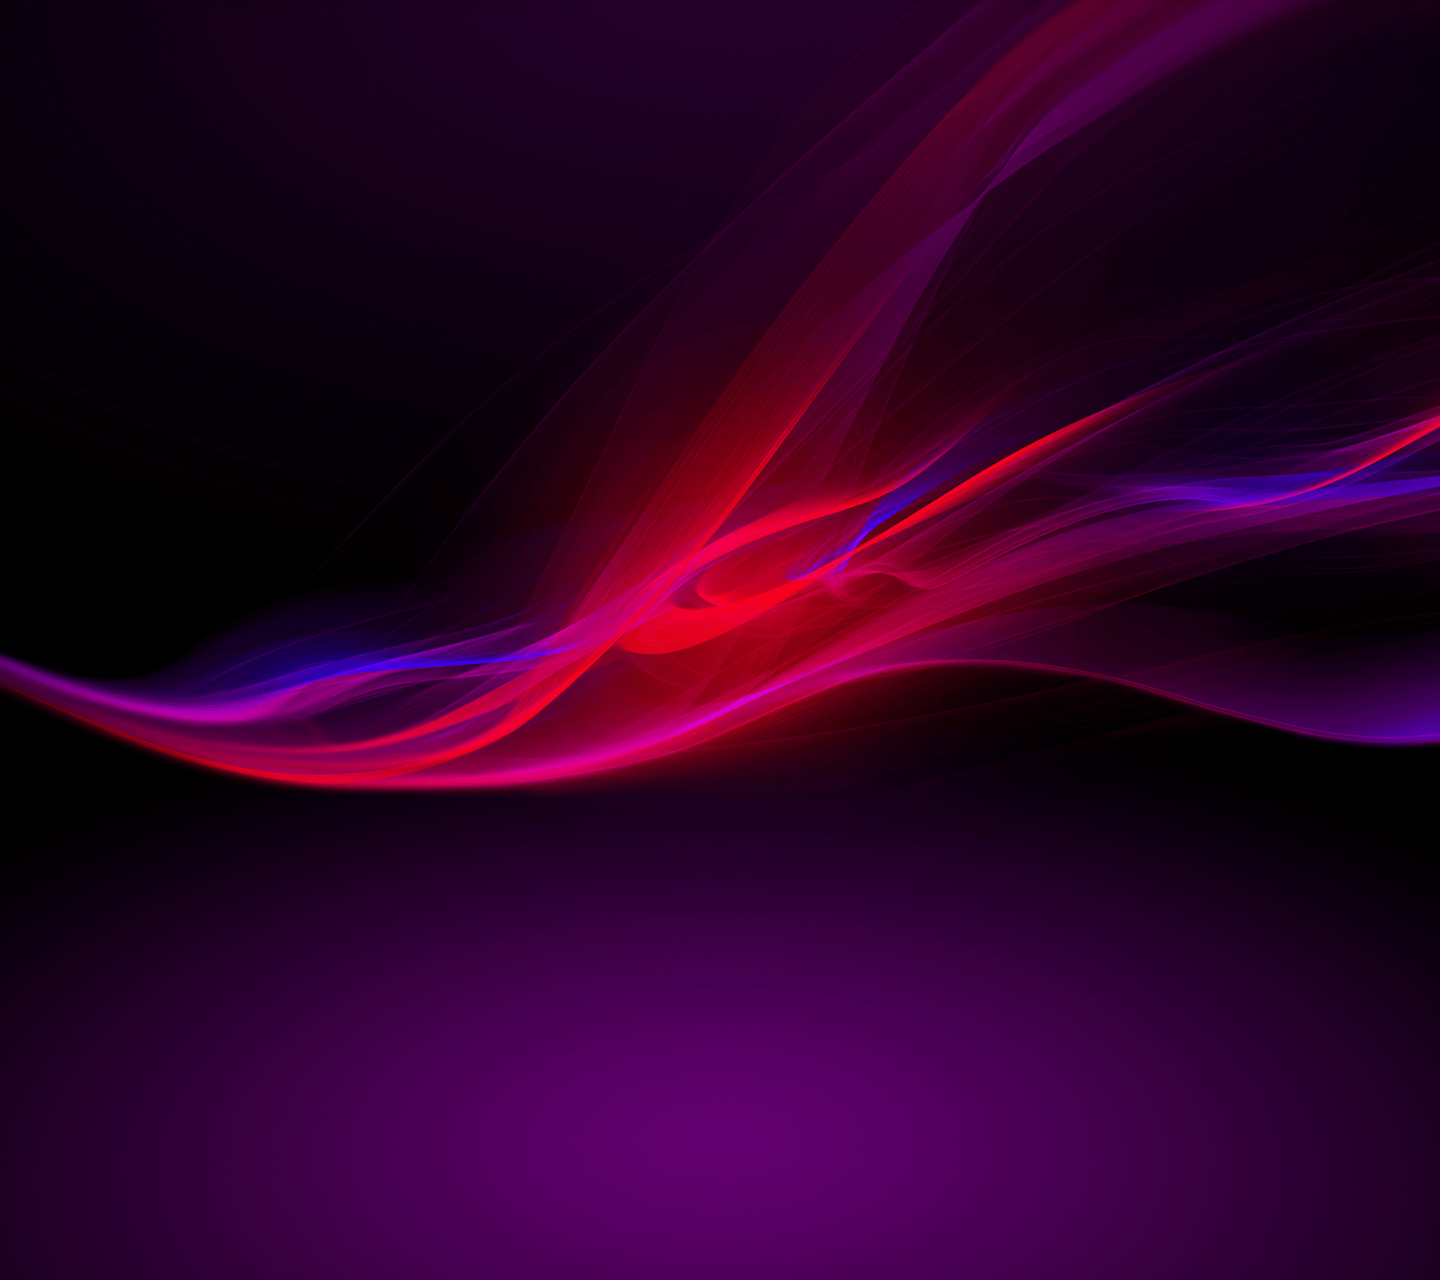 Sony Xperia Wallpapers - Wallpaper Cave